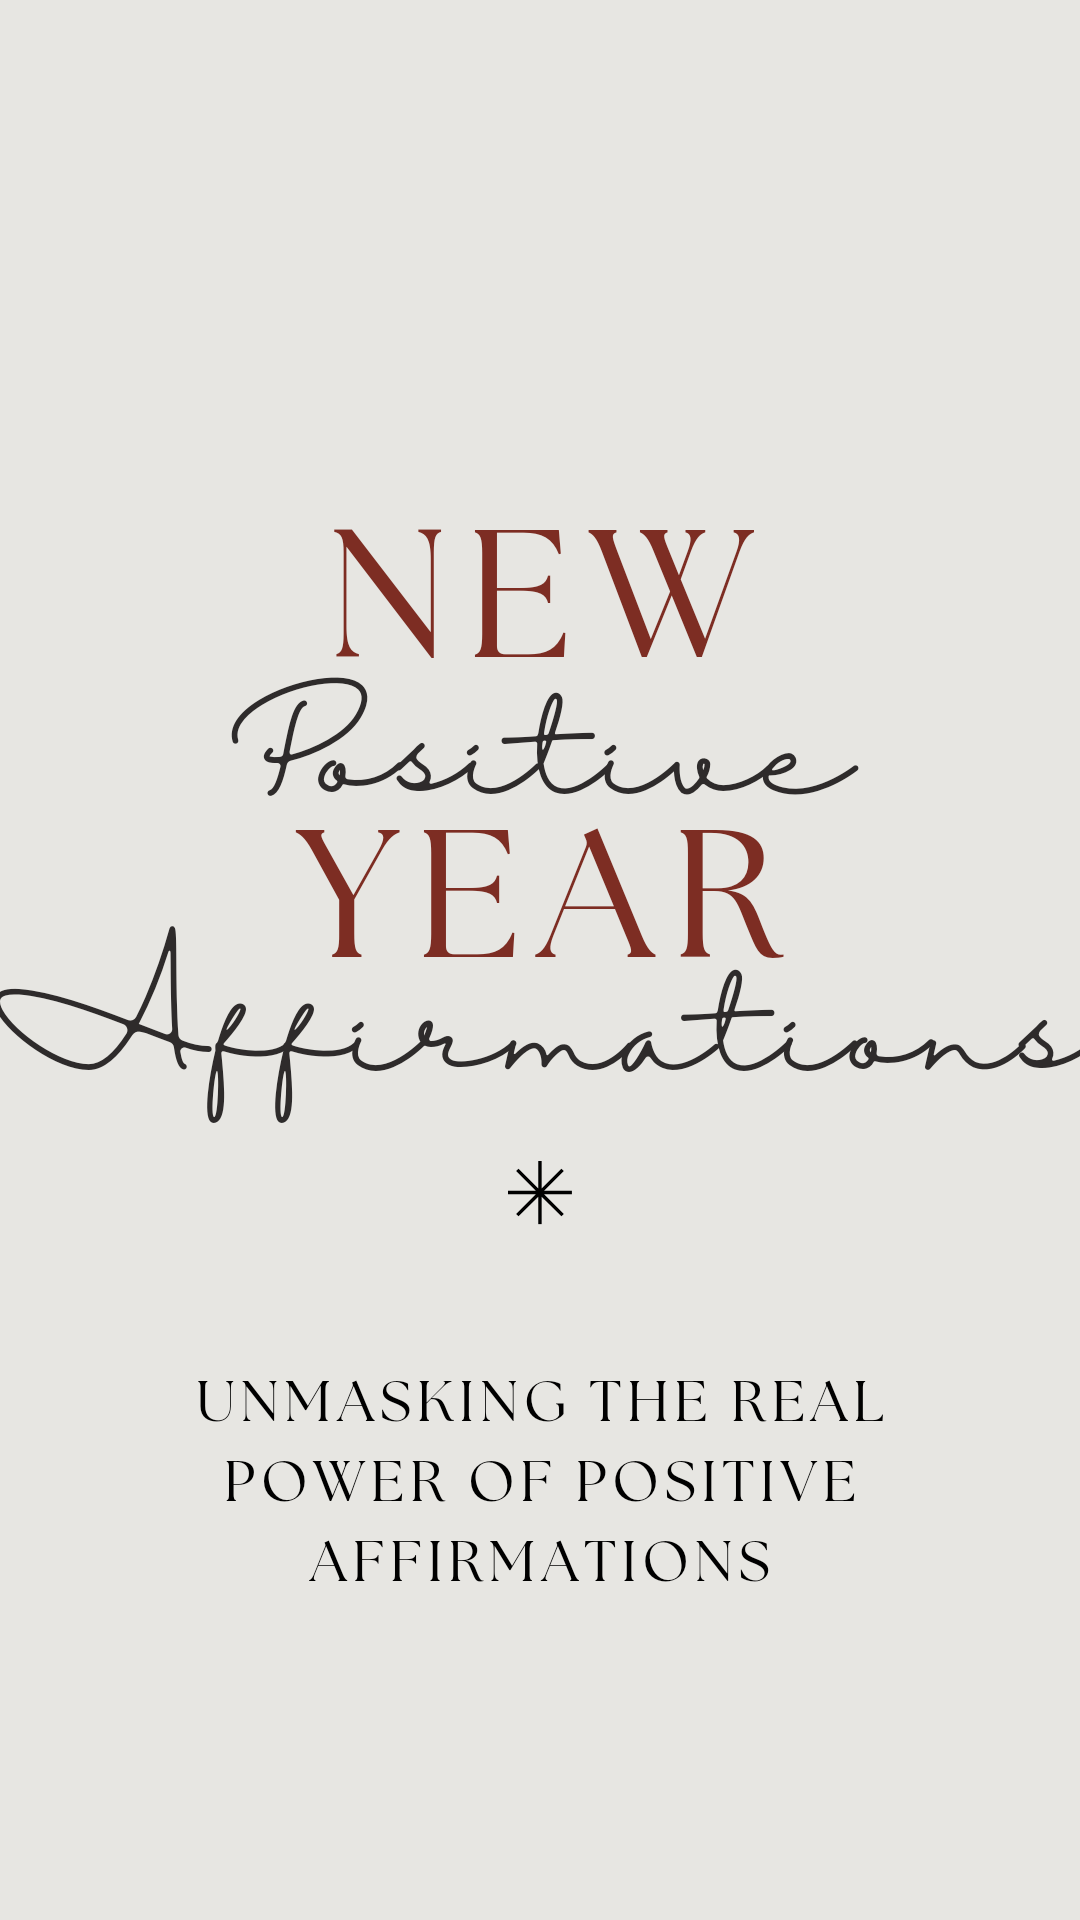 Positive Affirmations to Ignite Your New Year